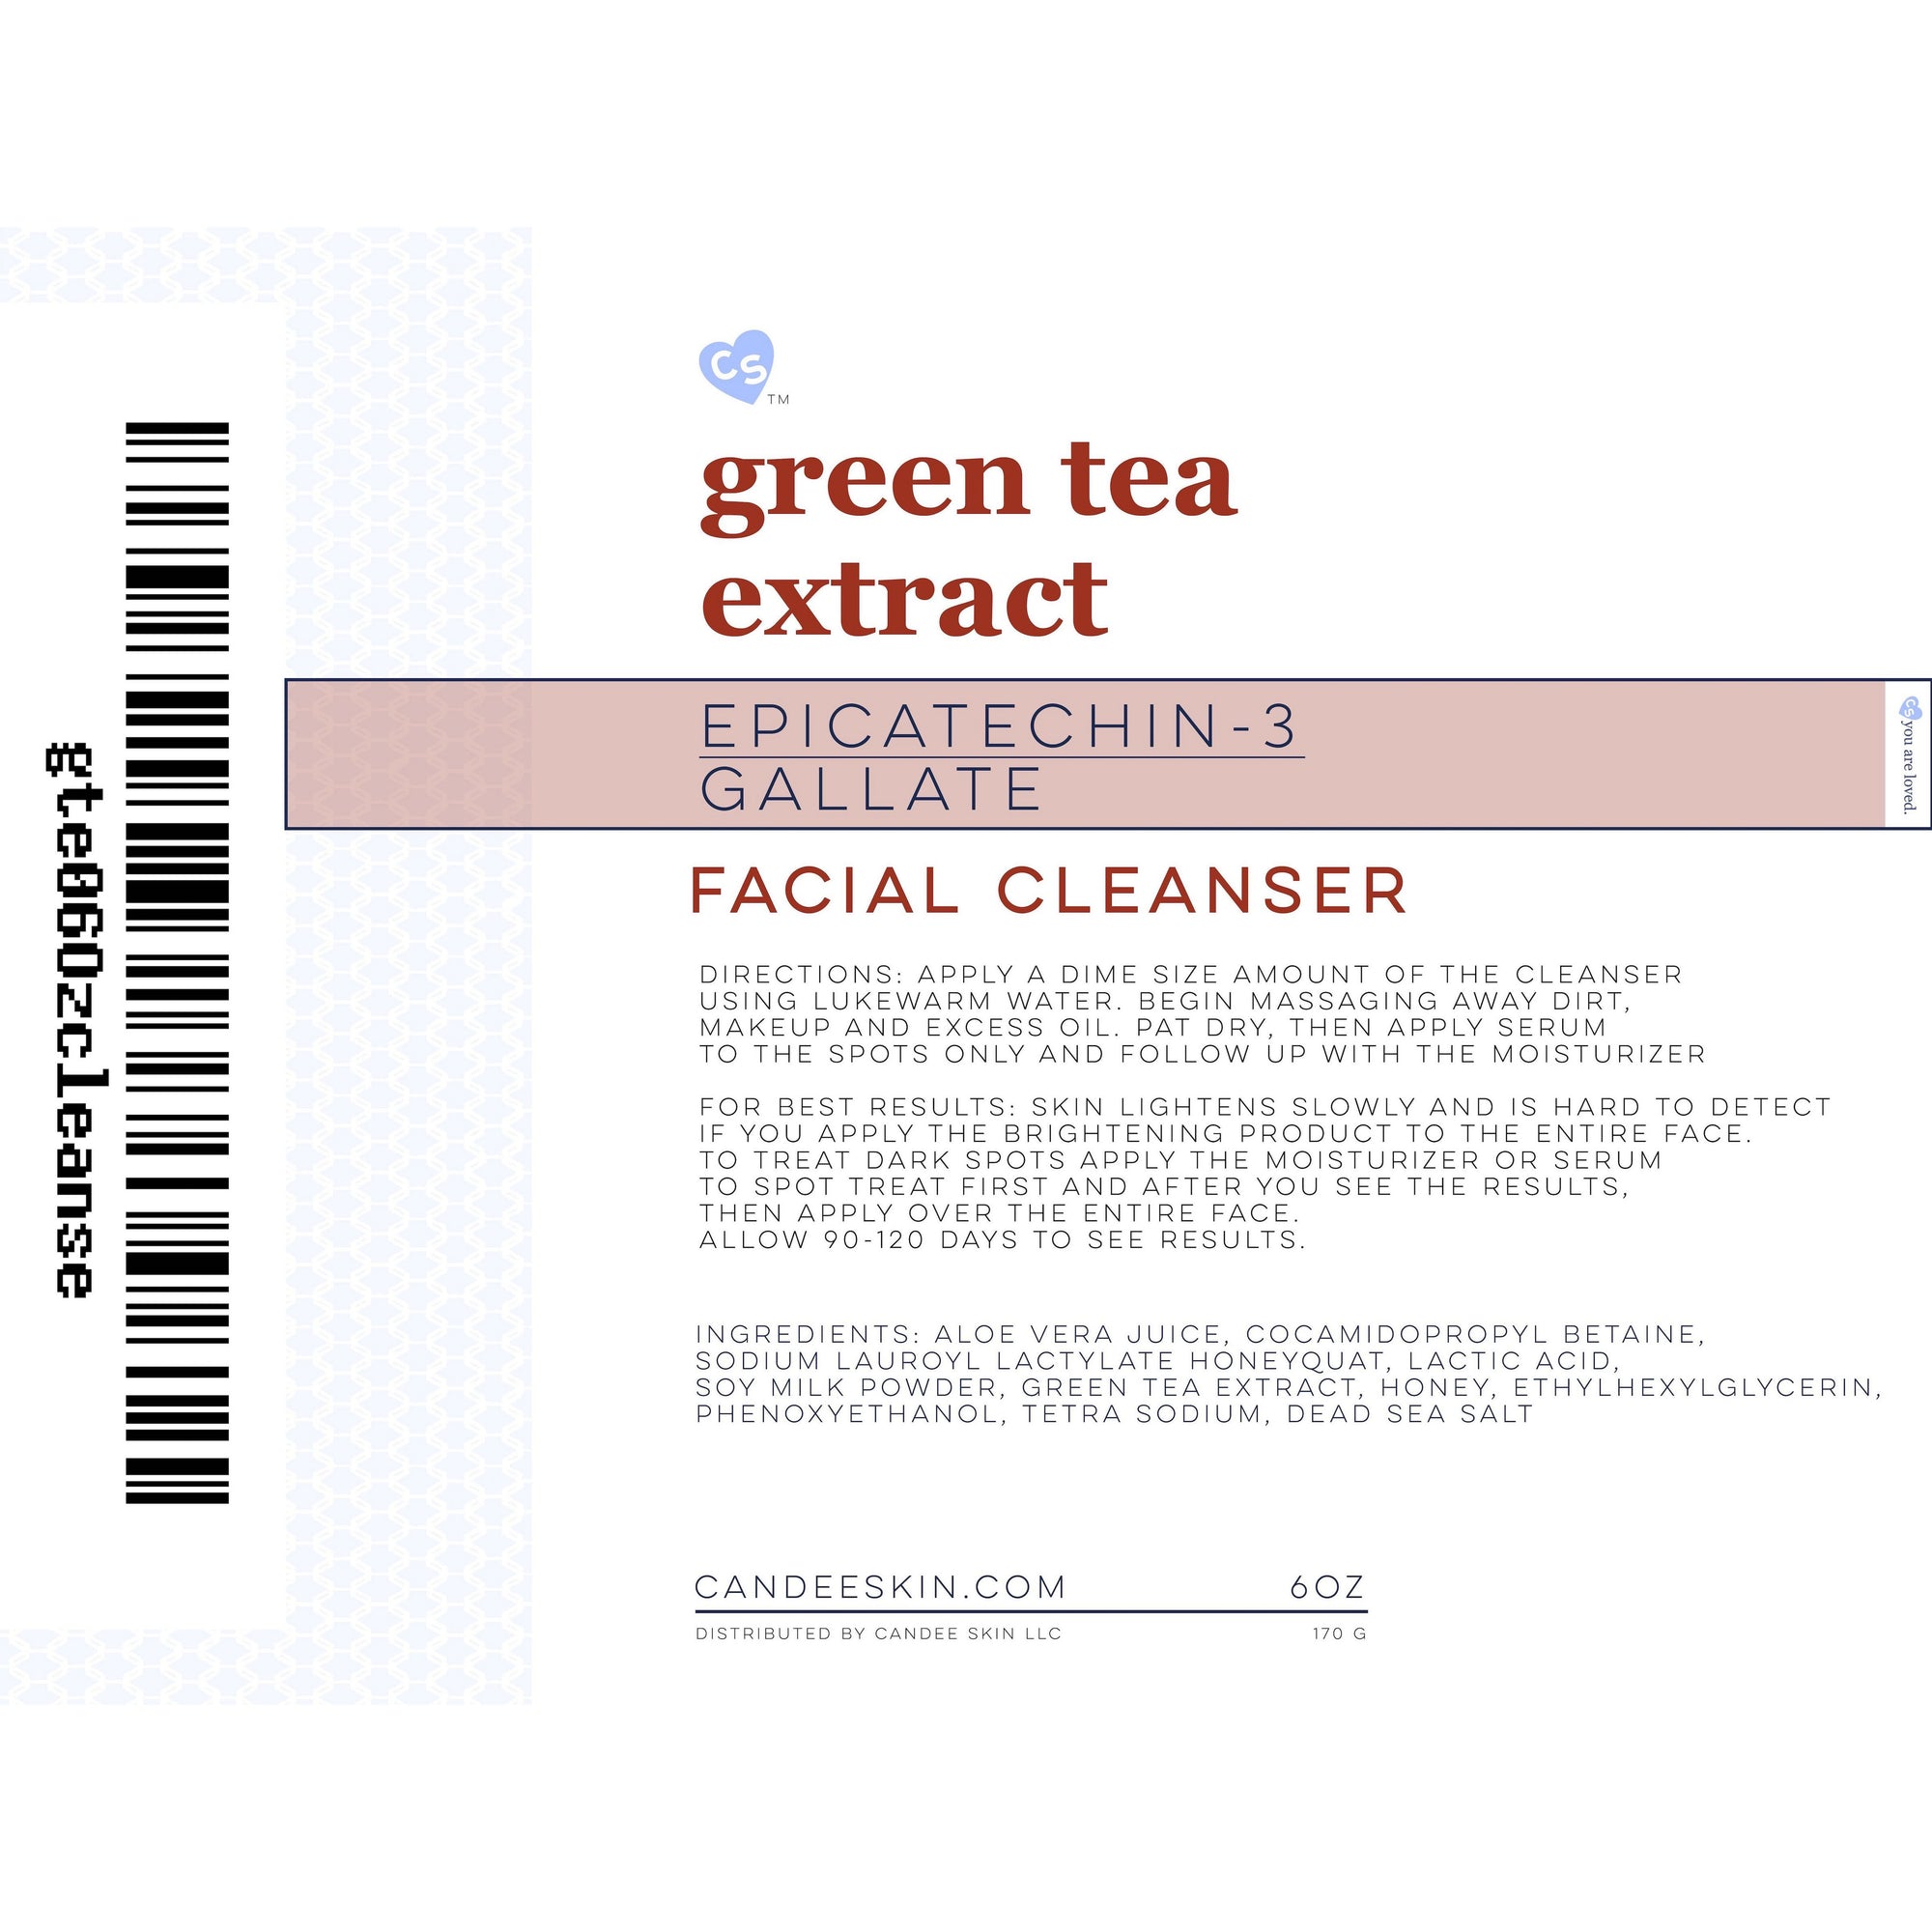 Green Tea Extract Facial Cleanser Ingredients/ Directions.Candee Skin Products. Simplified Skin Care Science.